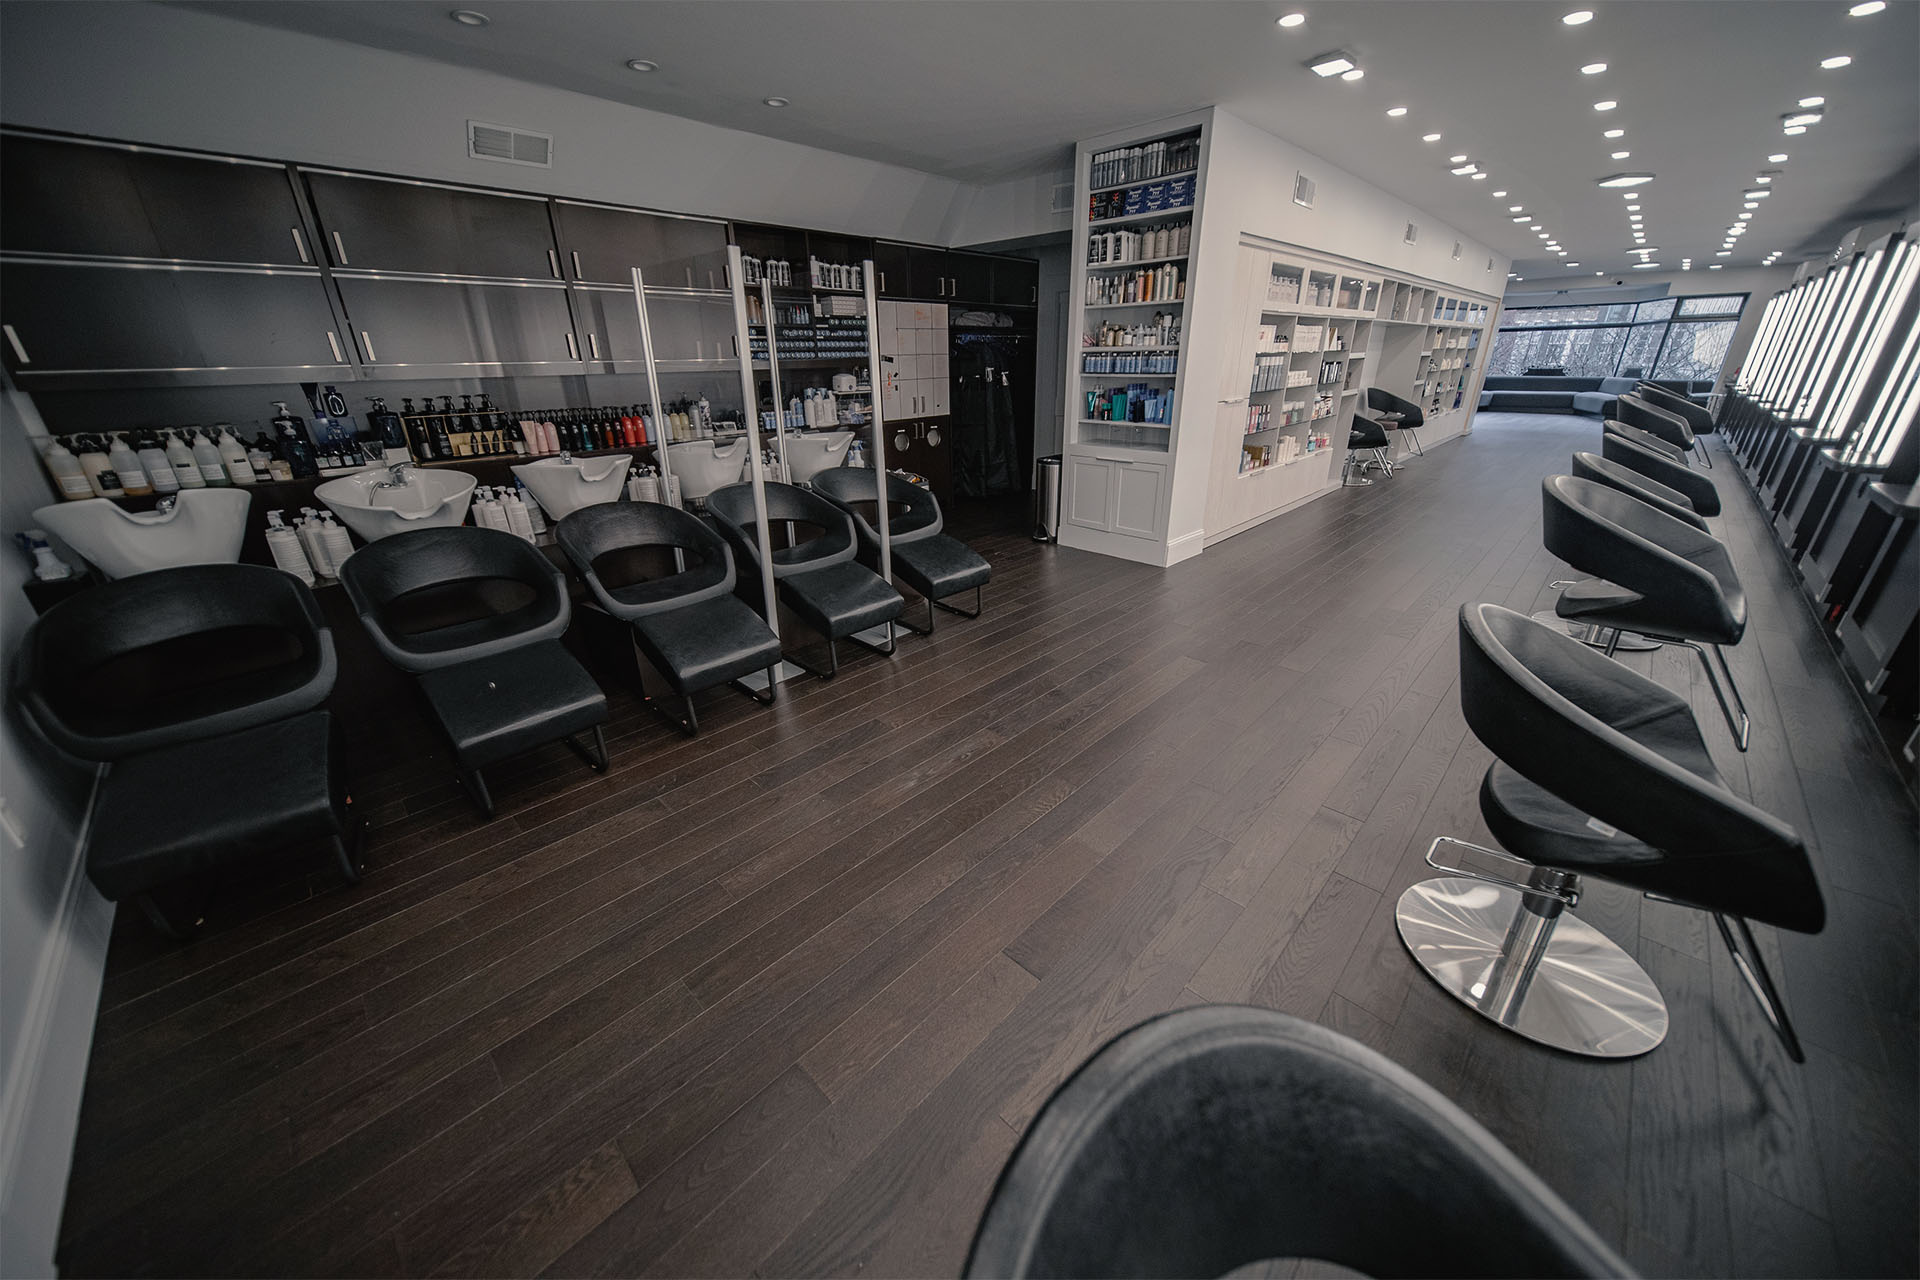 Sophisticated salon interior featuring dark hardwood floors by Weles, equipped with modern hairstyling stations, sleek chairs, and extensive product shelves, creating a chic and professional atmosphere for beauty services.